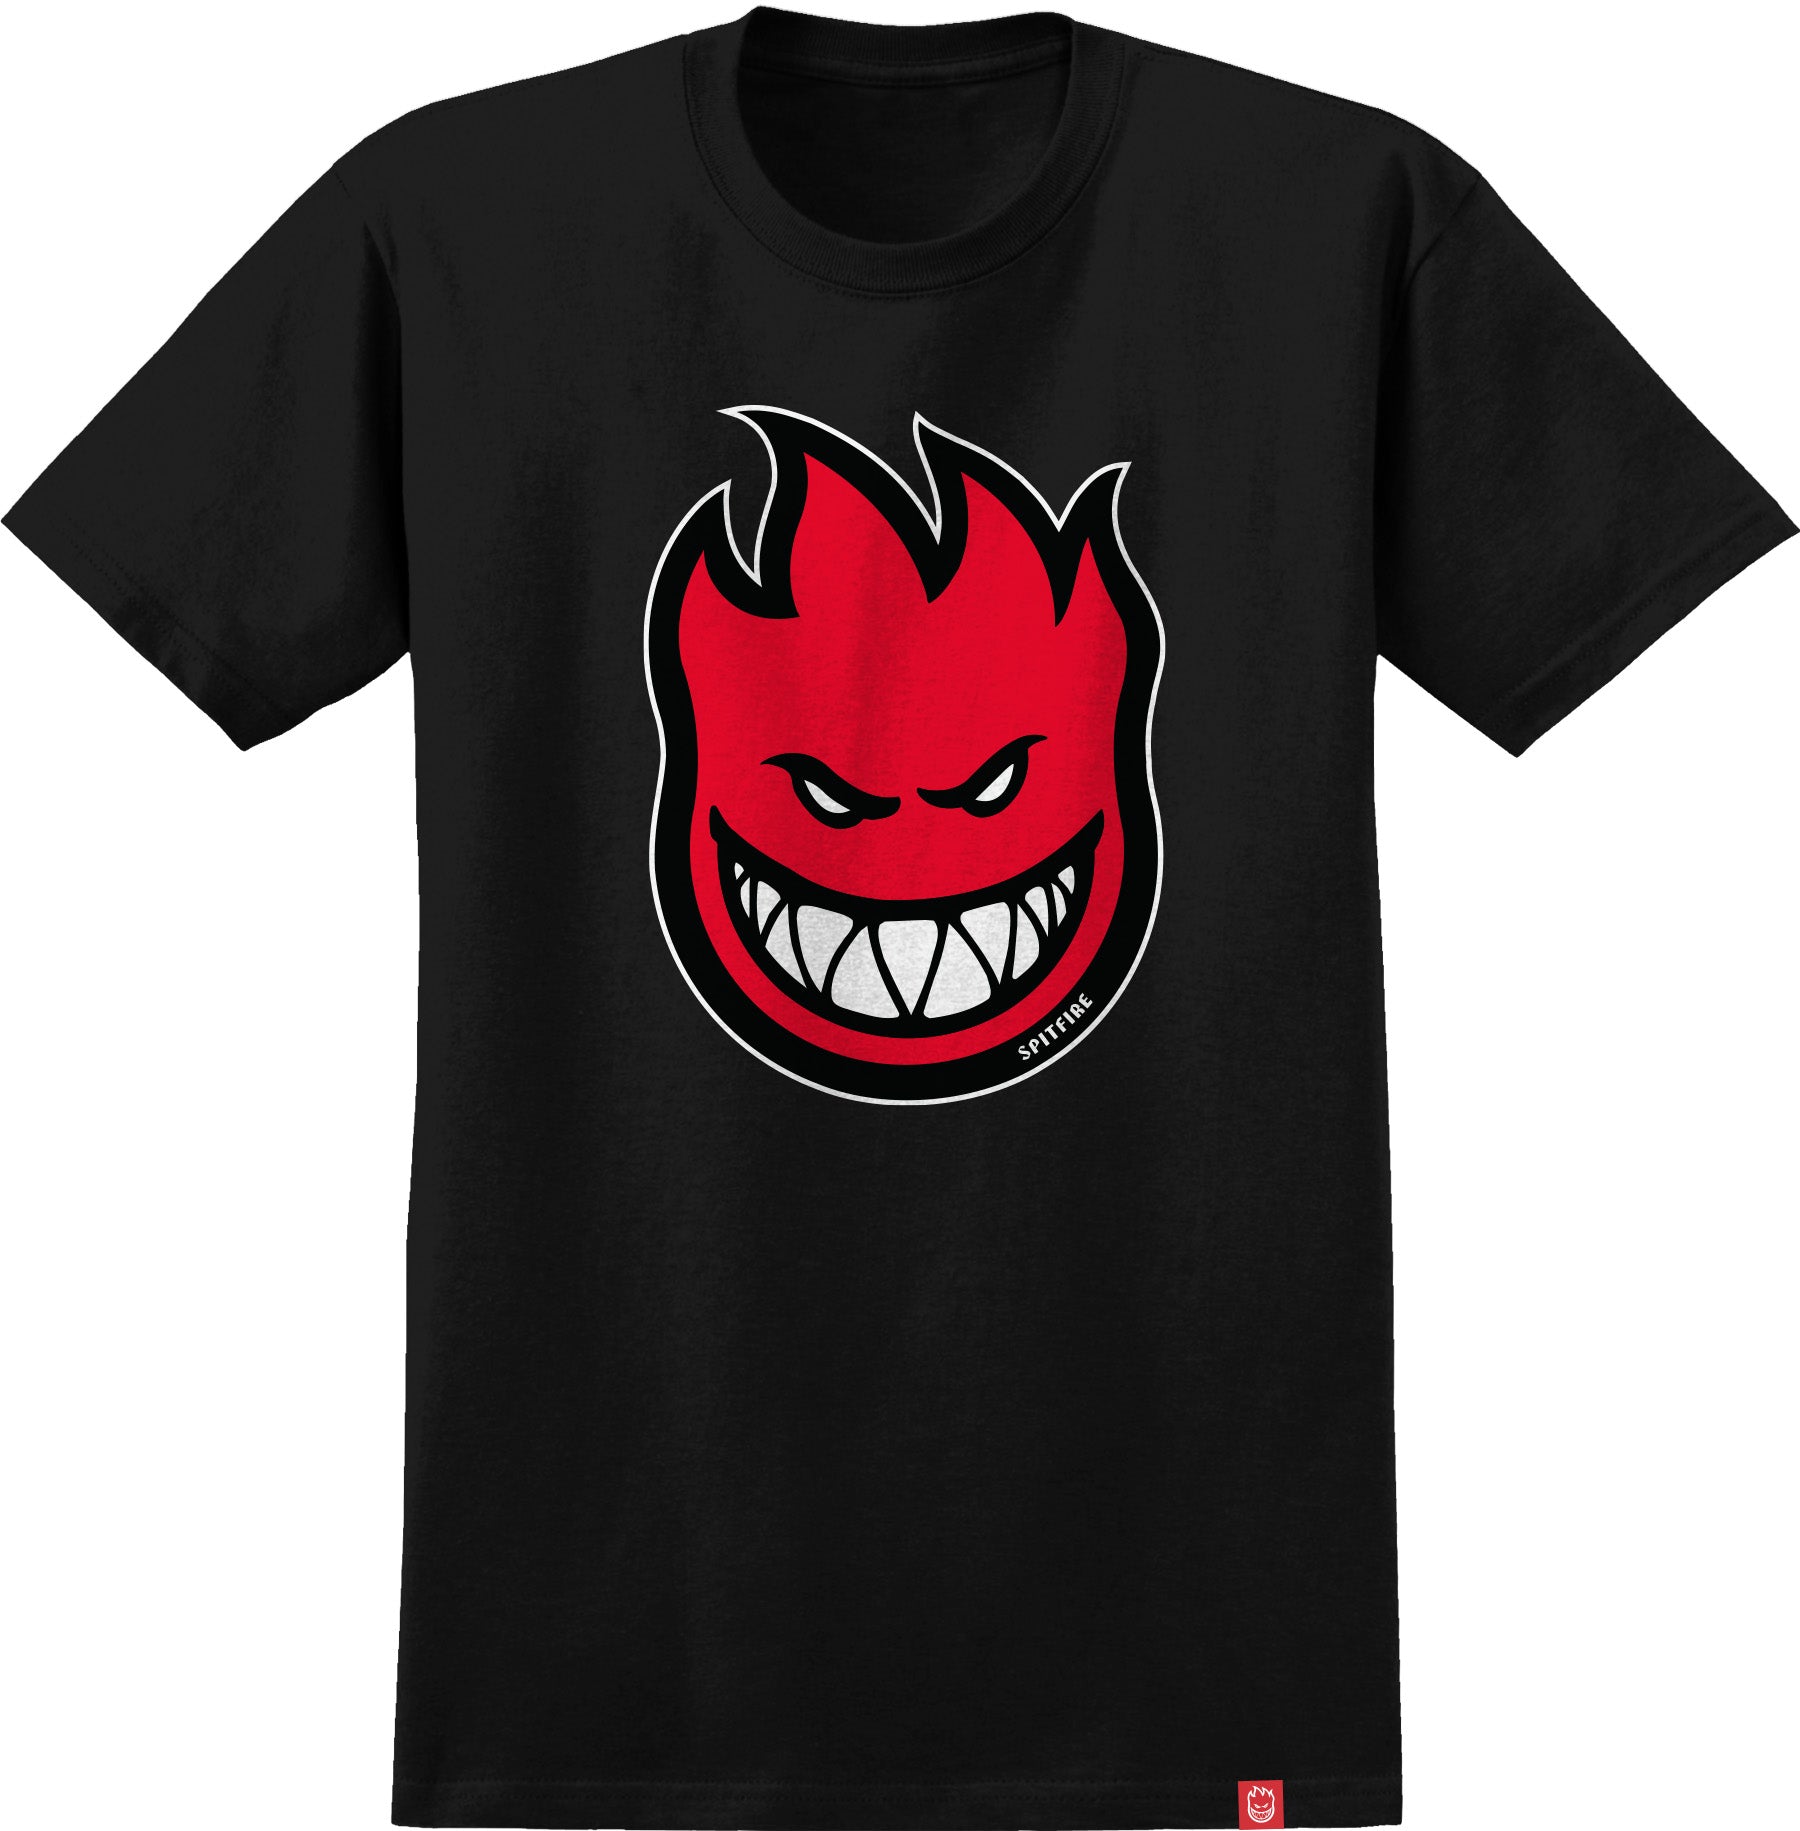 Youth S/S Bighead Fill Tee - Black/Red